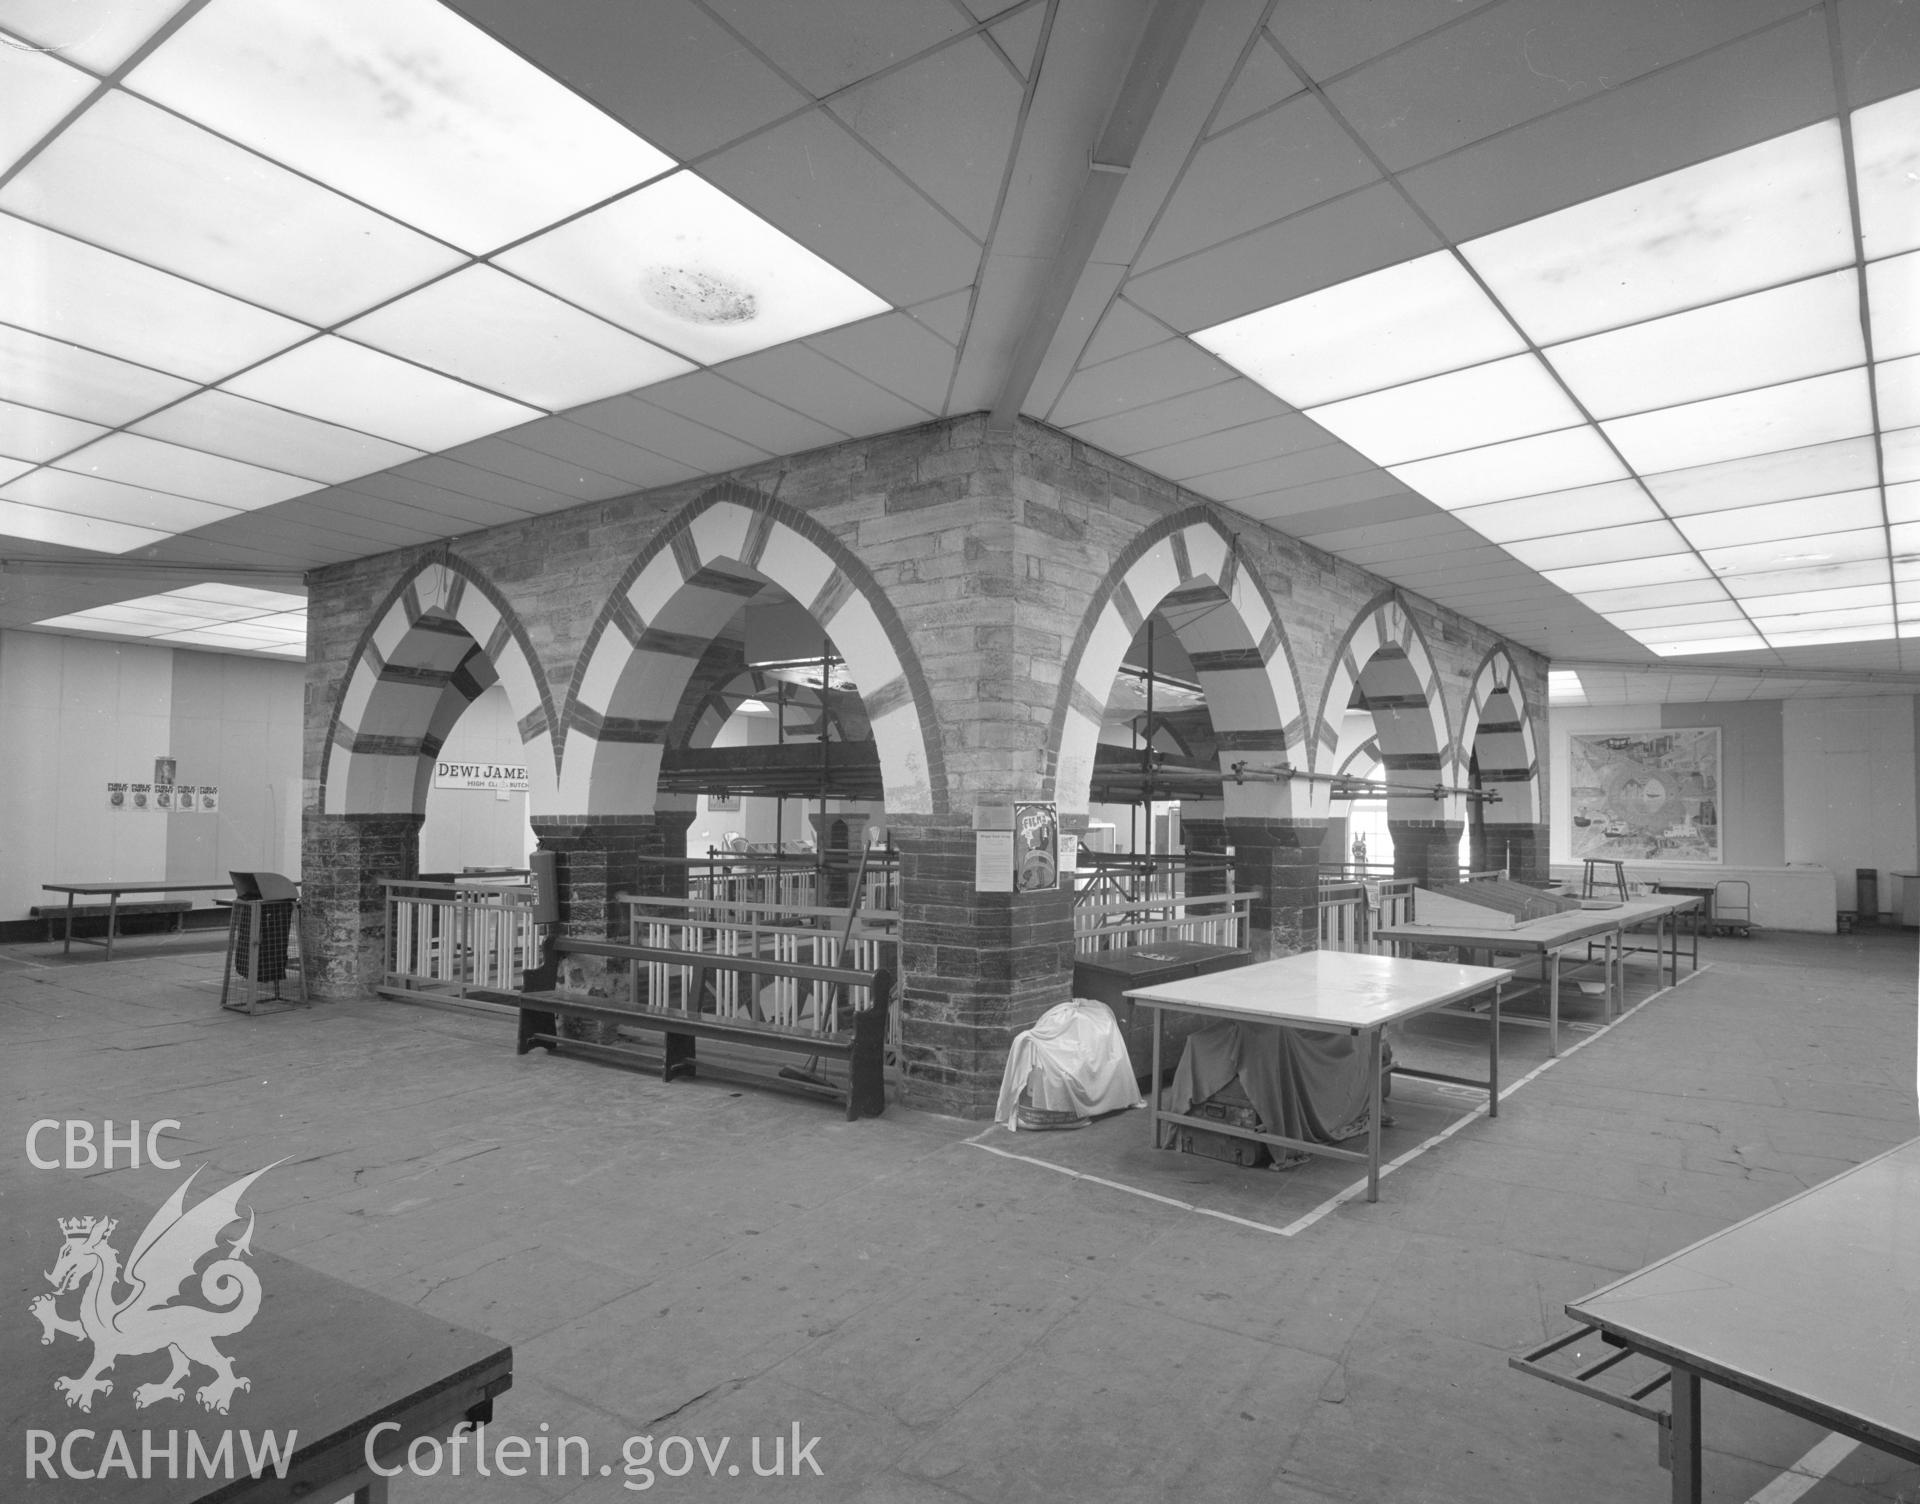 Black and white acetate negative showing an interior view of the Market Hall in Cardigan.